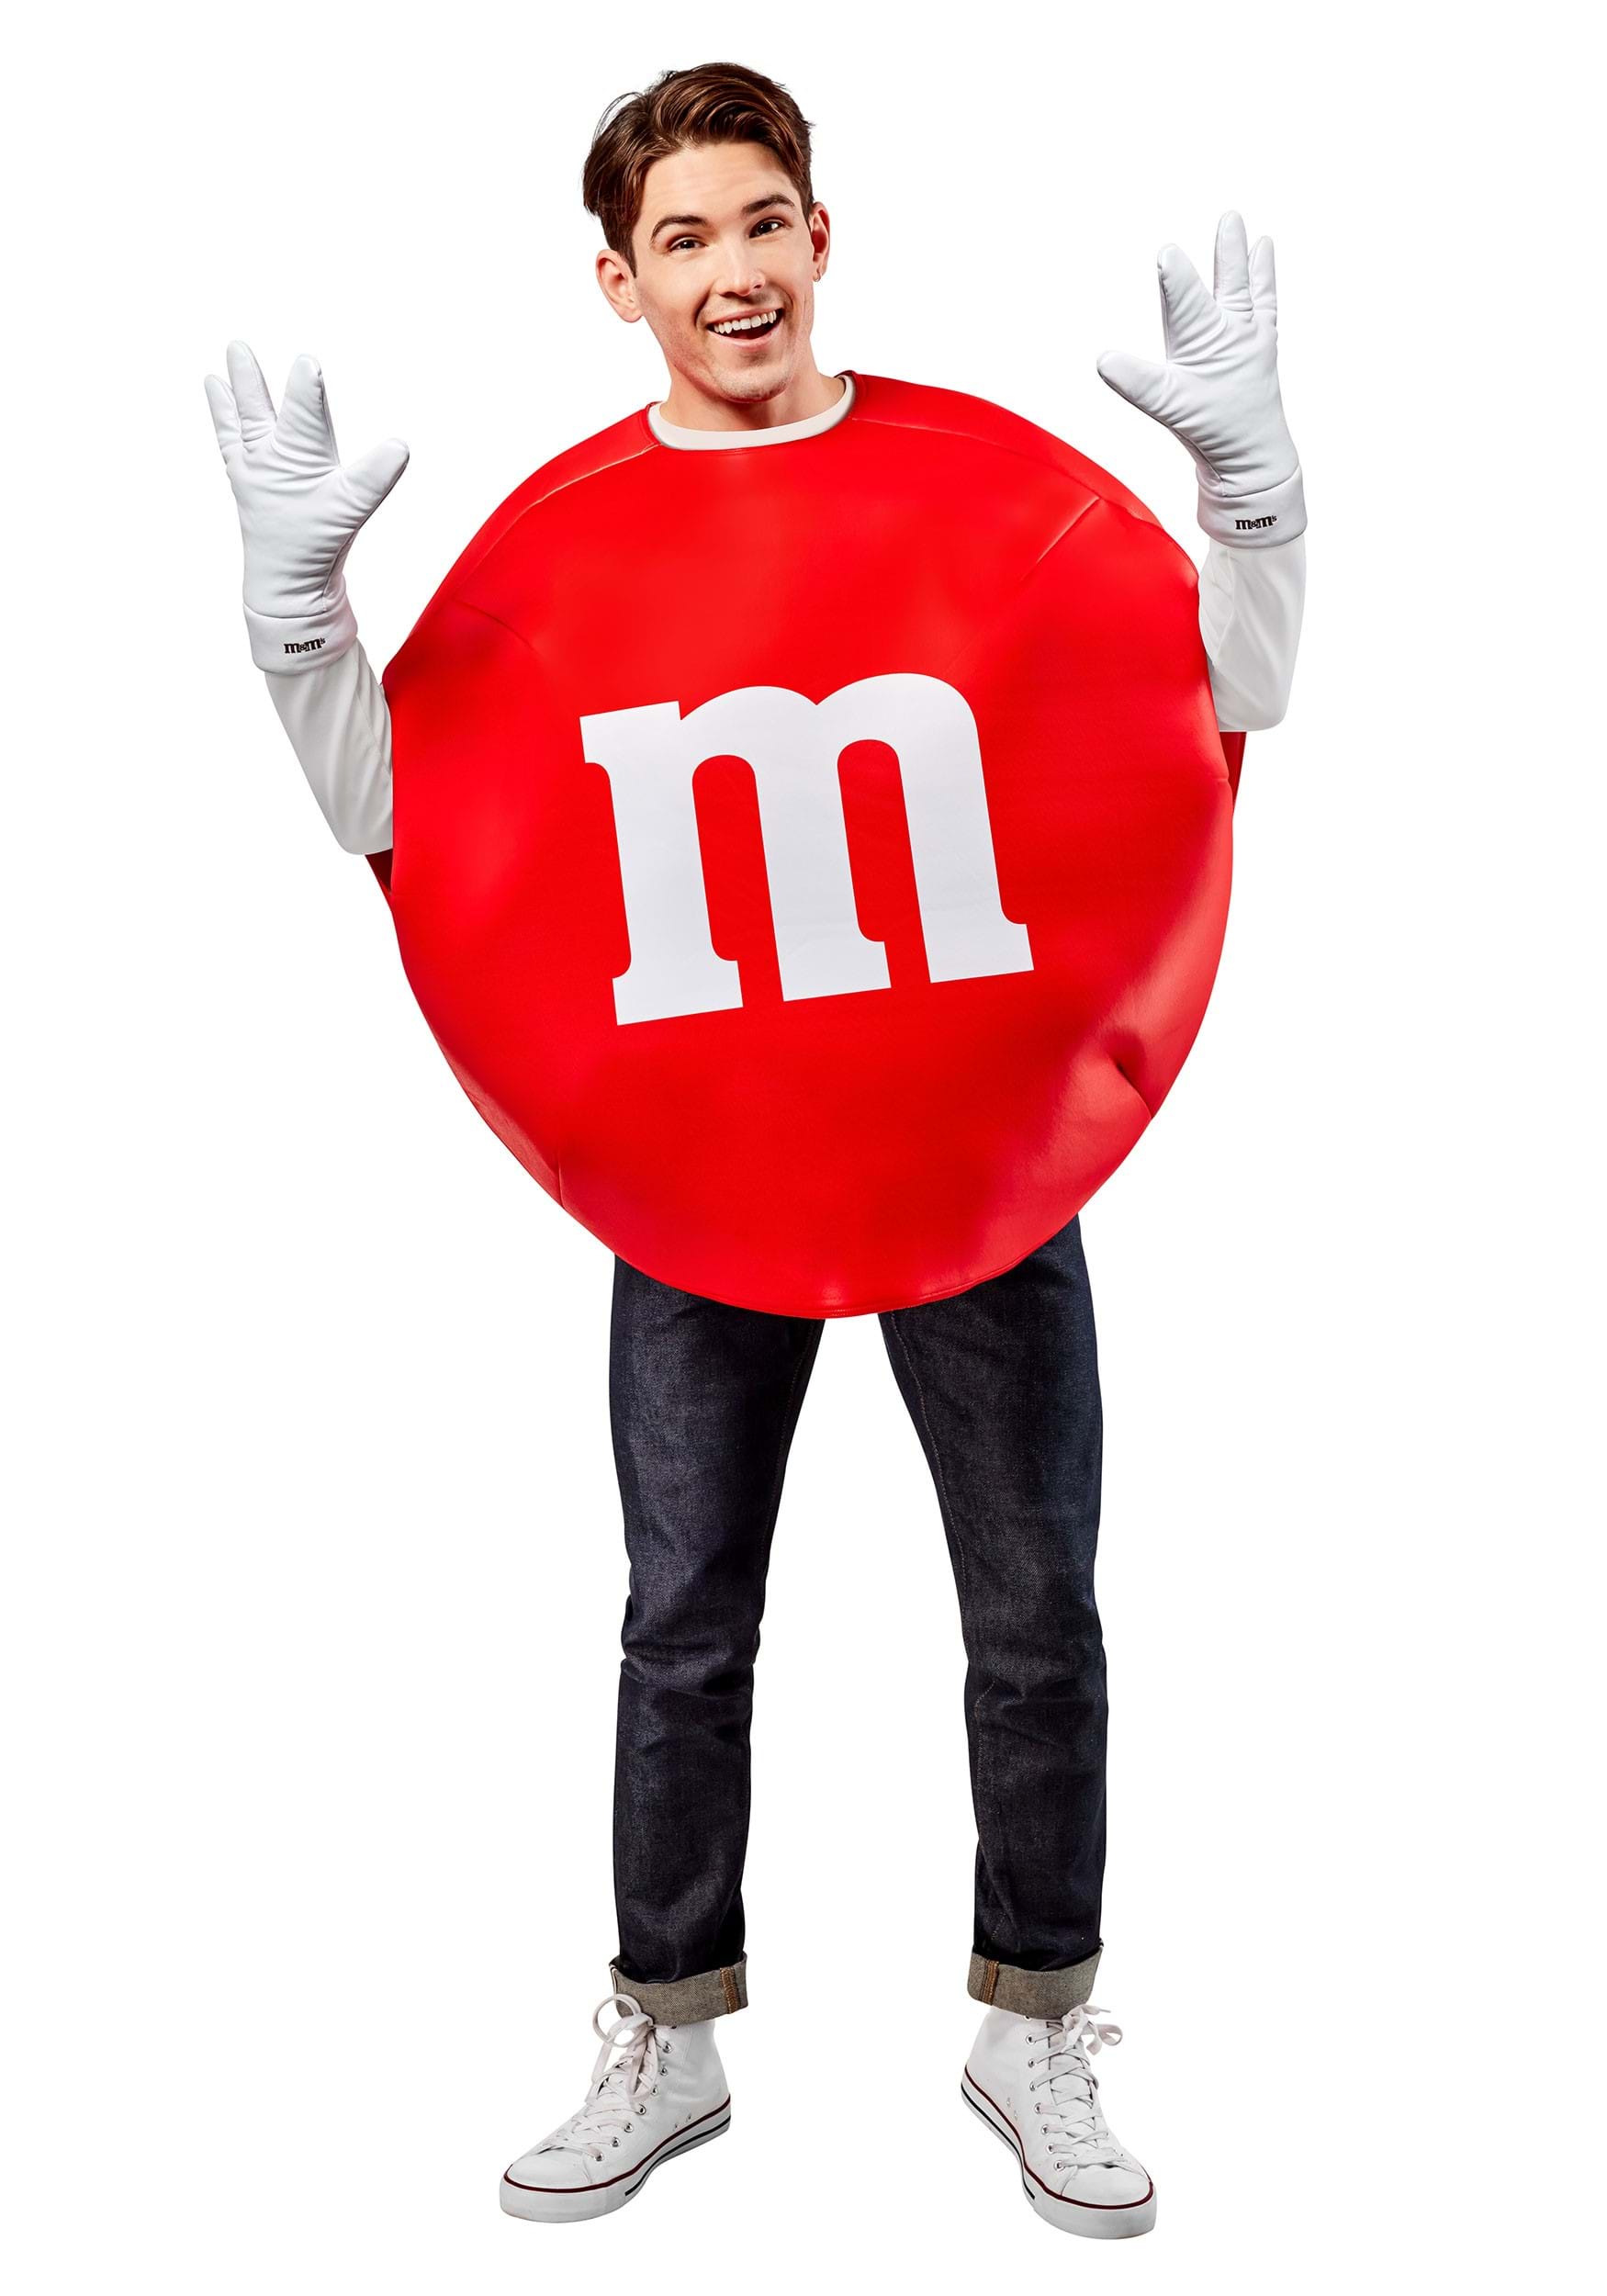 red m and m candy